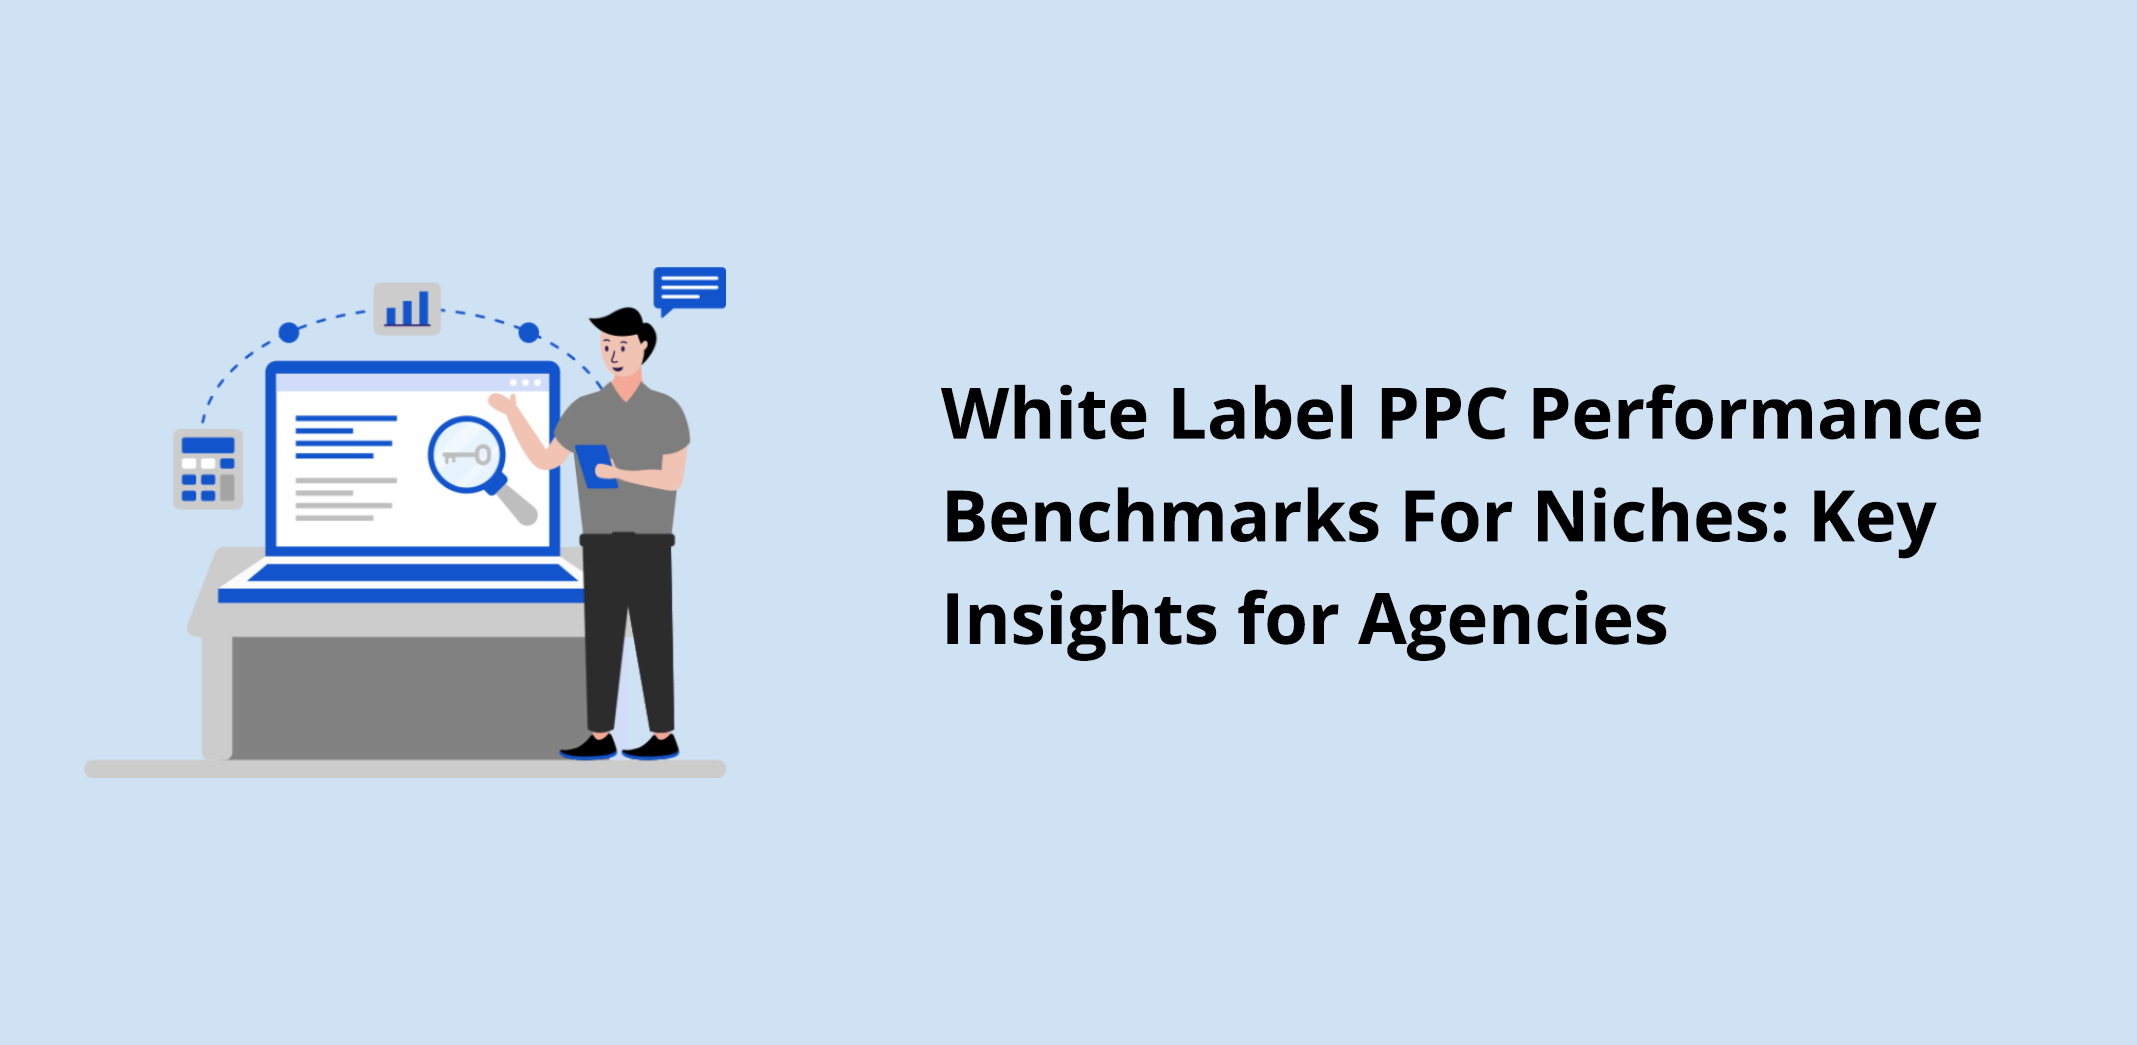 White Label PPC Performance Benchmarks For Niches: Key Insights for Agencies